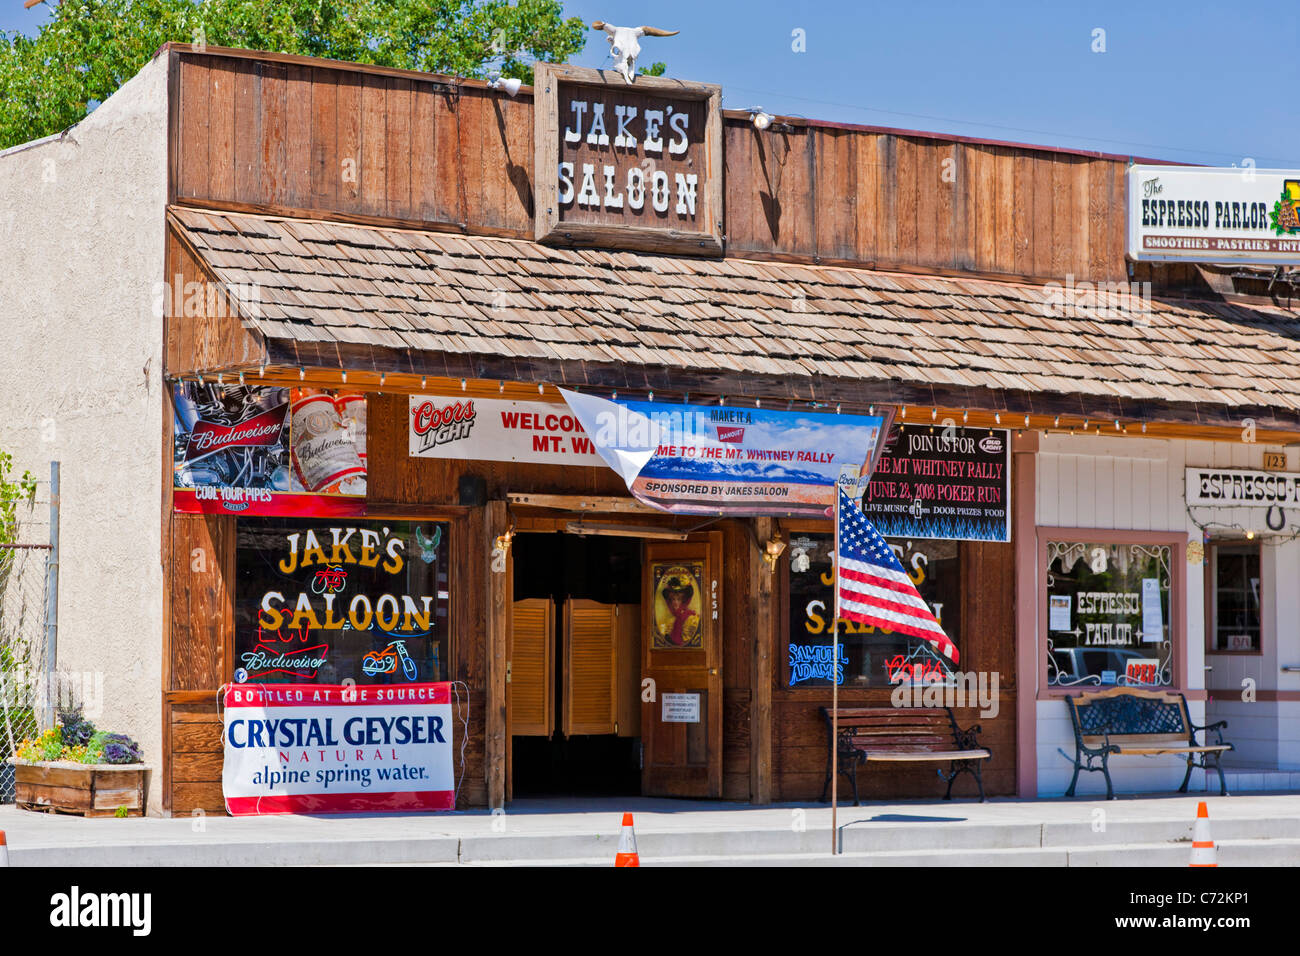 Jake's Saloon on Main Street, Lone Pine in the Owens Valley, just east of the Sierra Nevada Mountains, California USA. JMH5313 Stock Photo